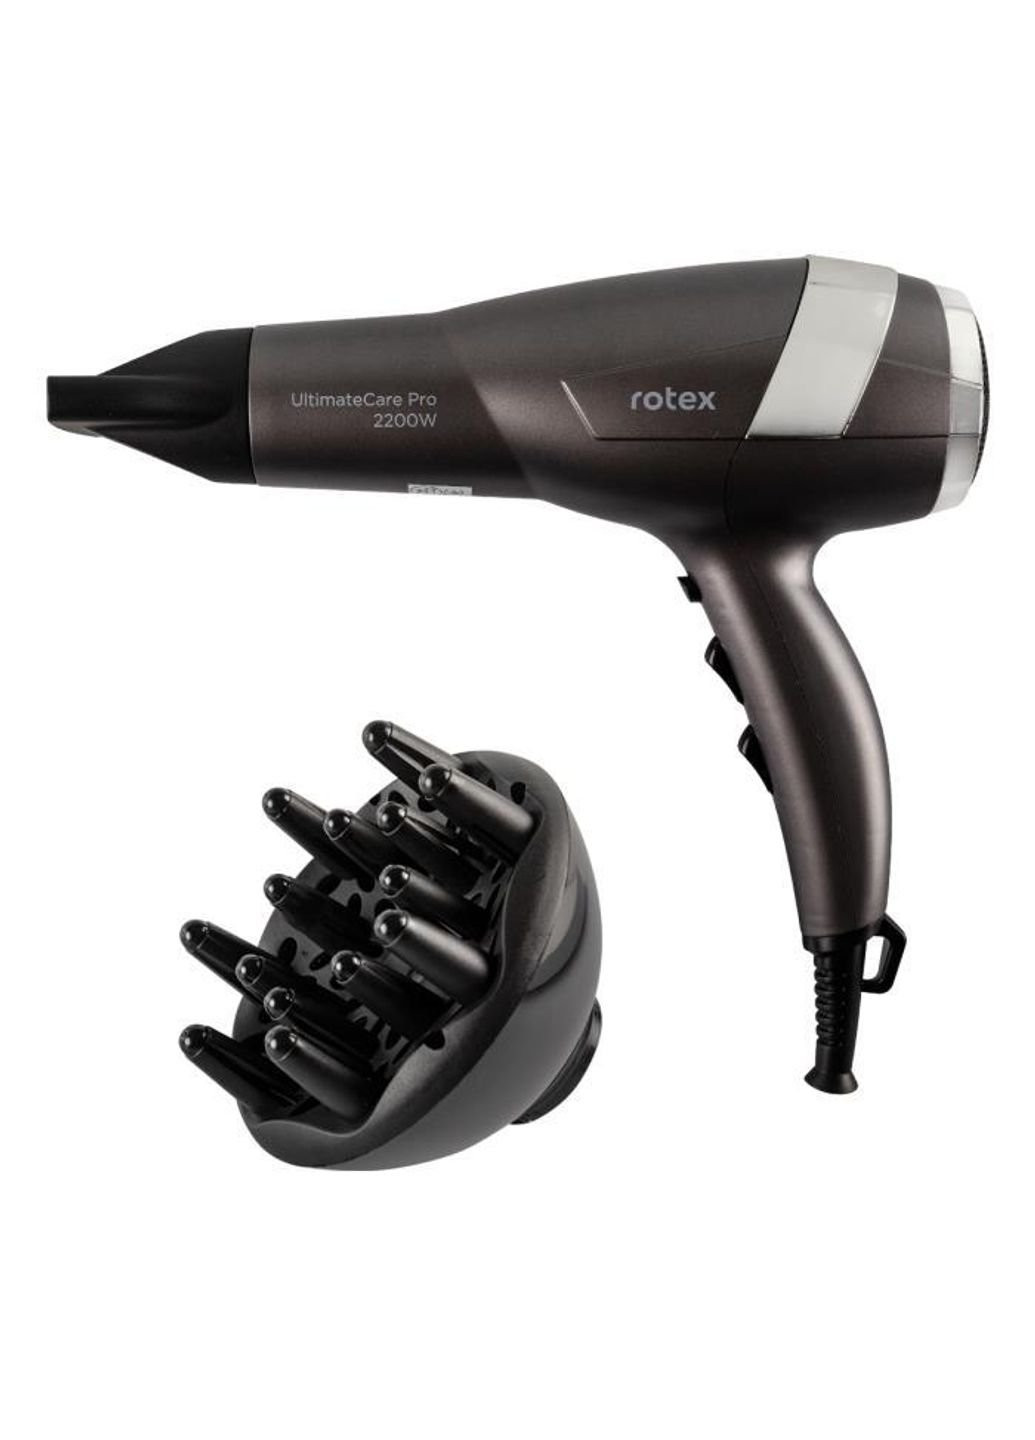 Фен Ultimate Care Pro 220-R 2200 Вт Rotex (253854398)